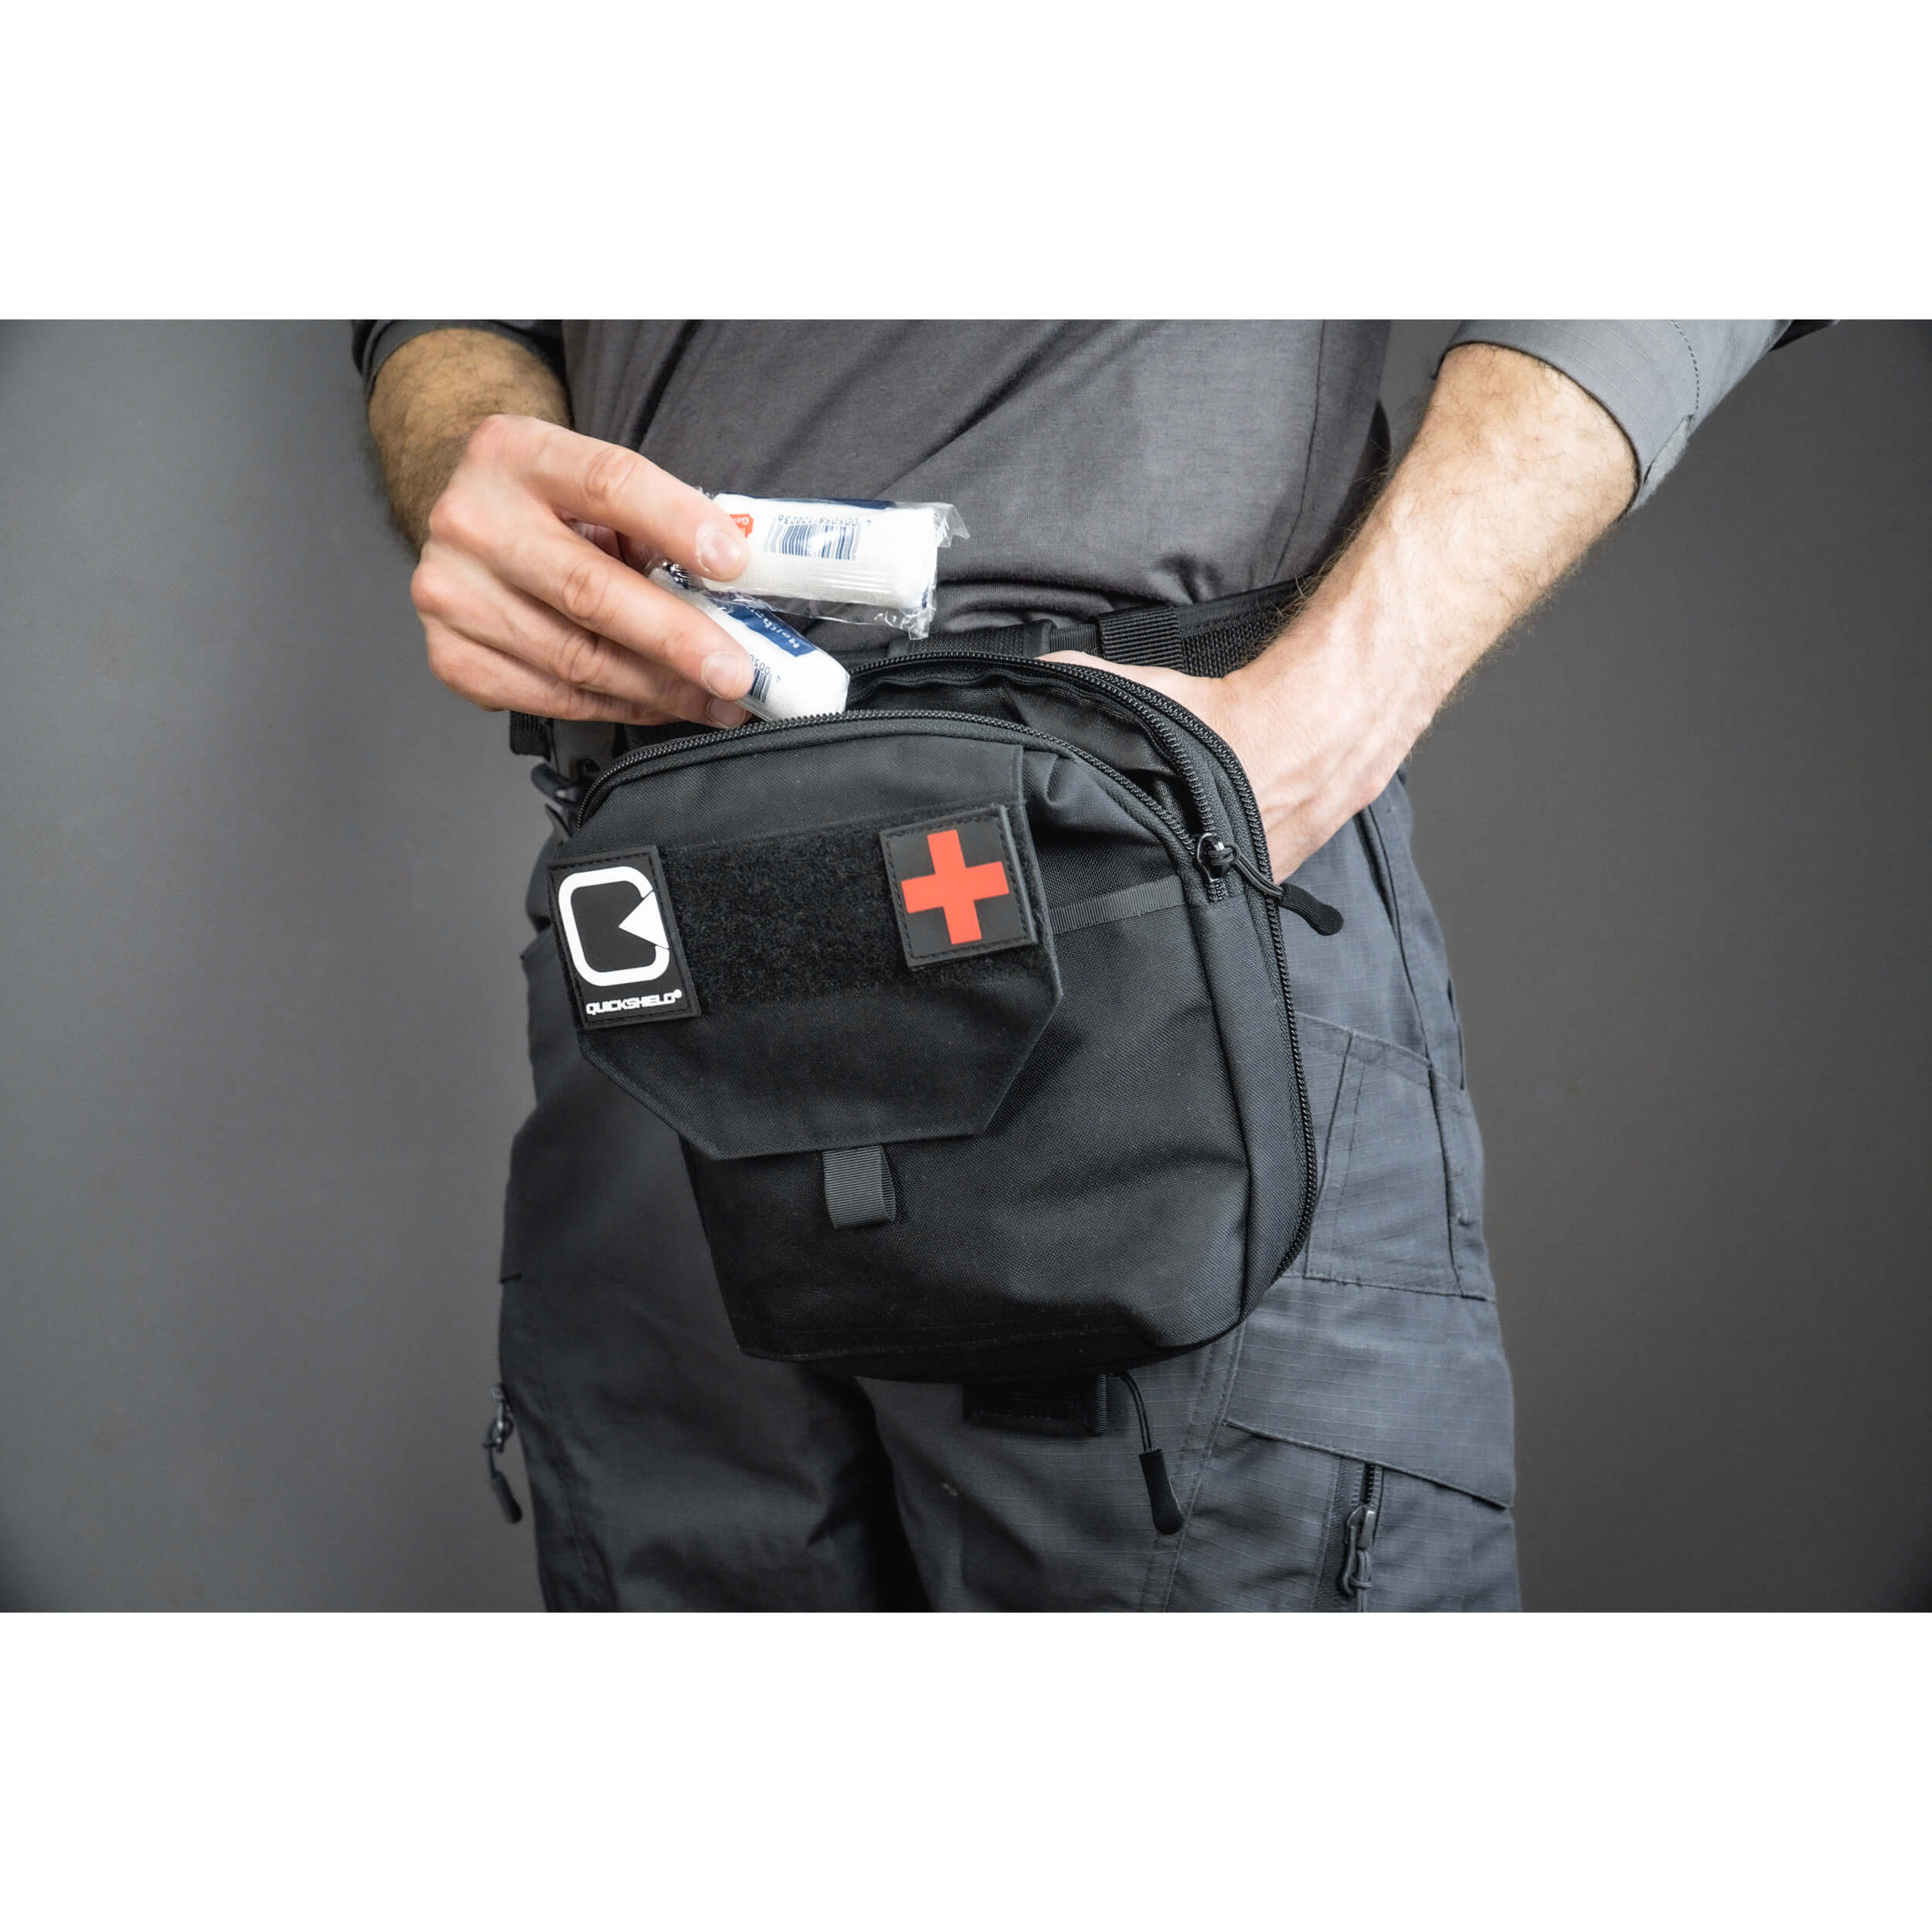 Quickshield - Tactical (tactical protective shield)